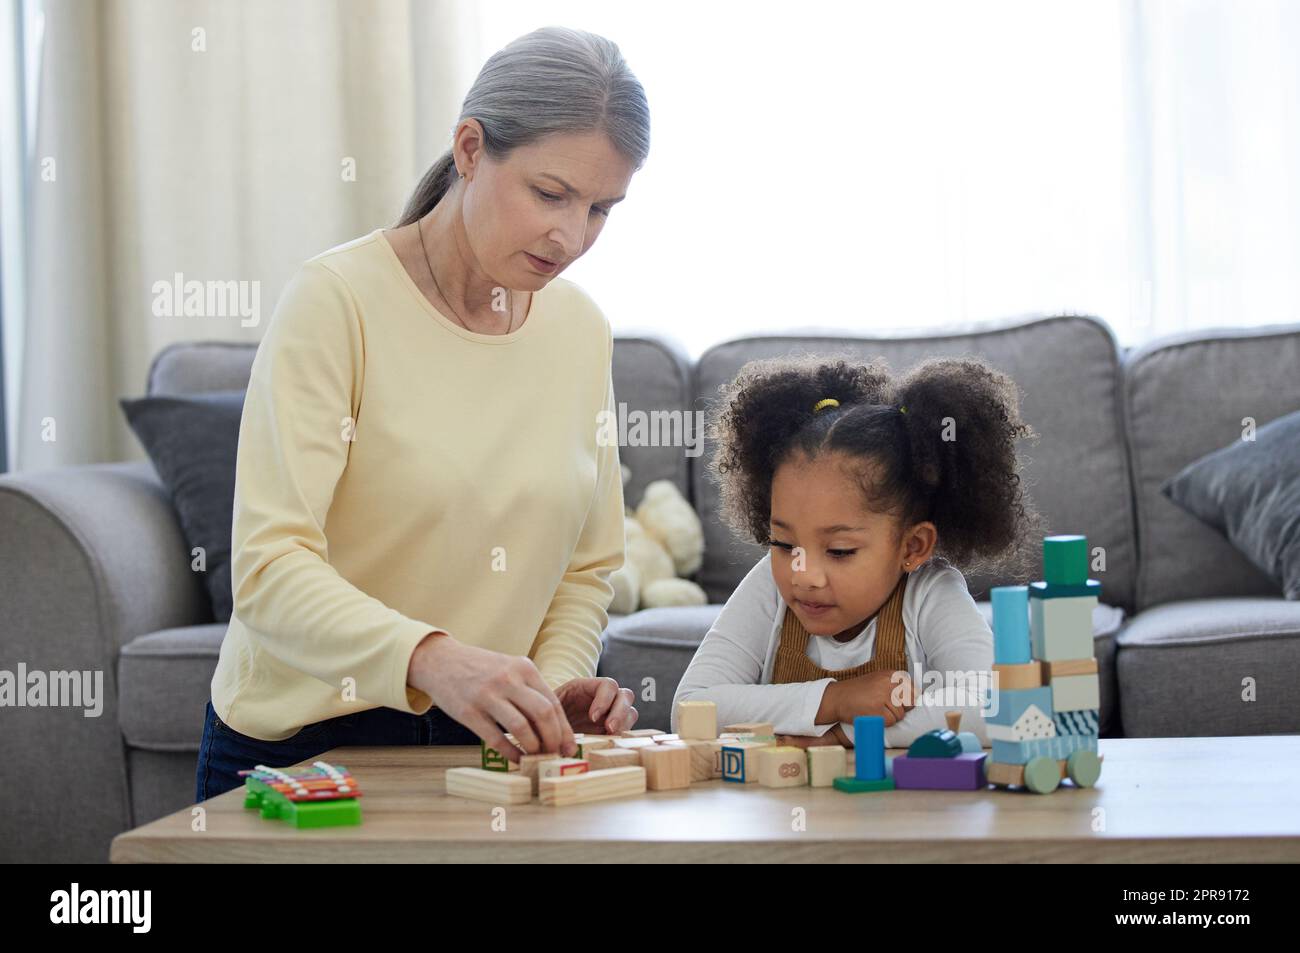 Alternative methods have their place in therapy. a mature child psychologist with her patient. Stock Photo